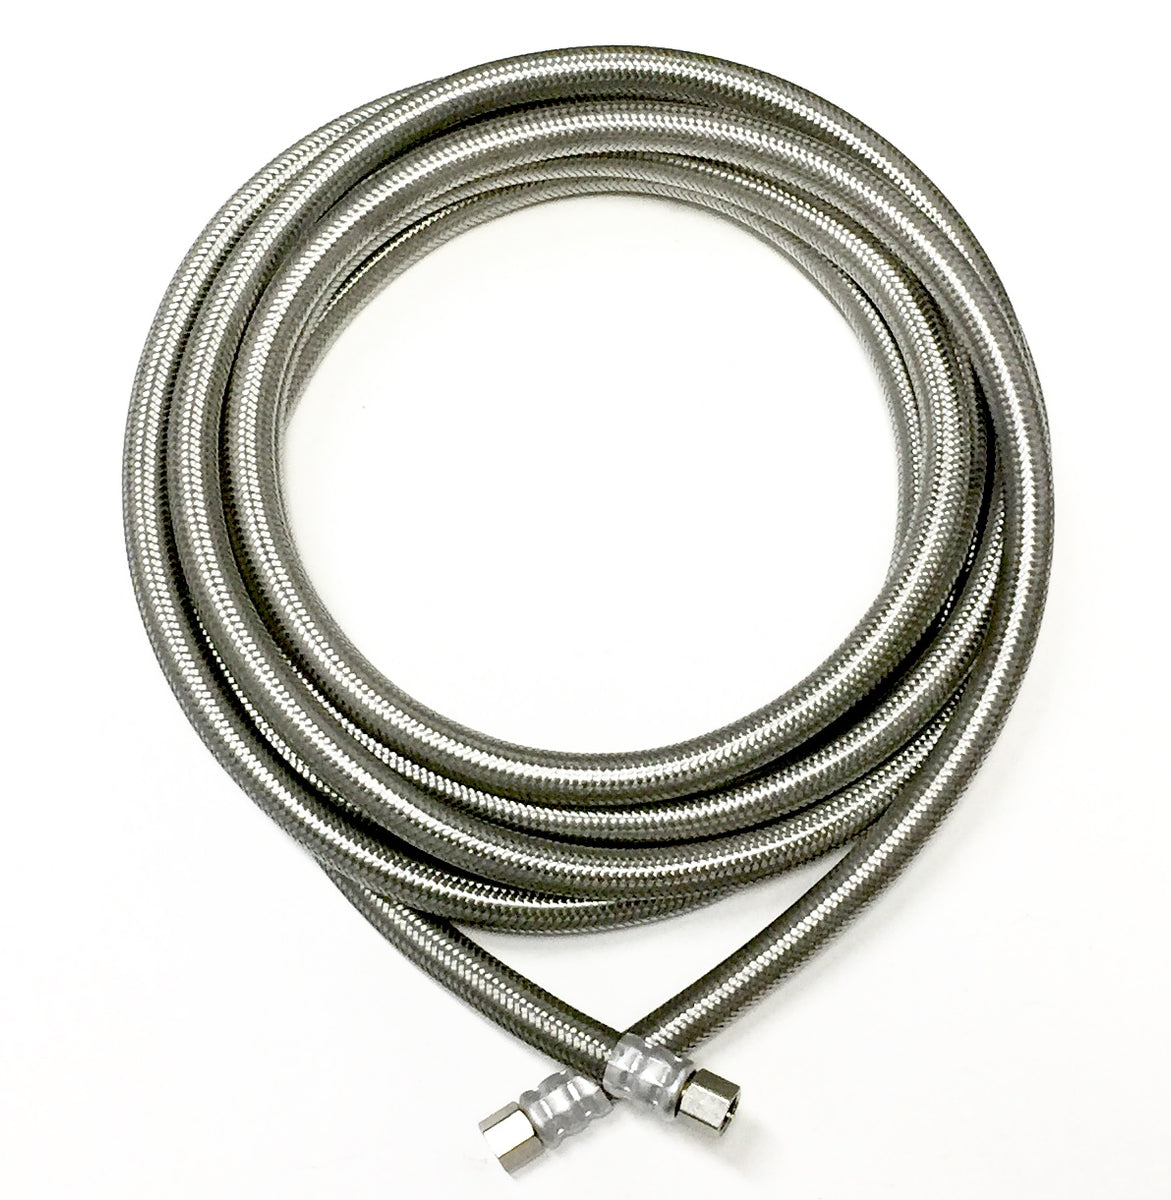 Shark Industrial RNAB083Y6FJD6 shark industrial 25 ft stainless steel  braided ice maker hose with 1/4 comp by 1/4 comp connection